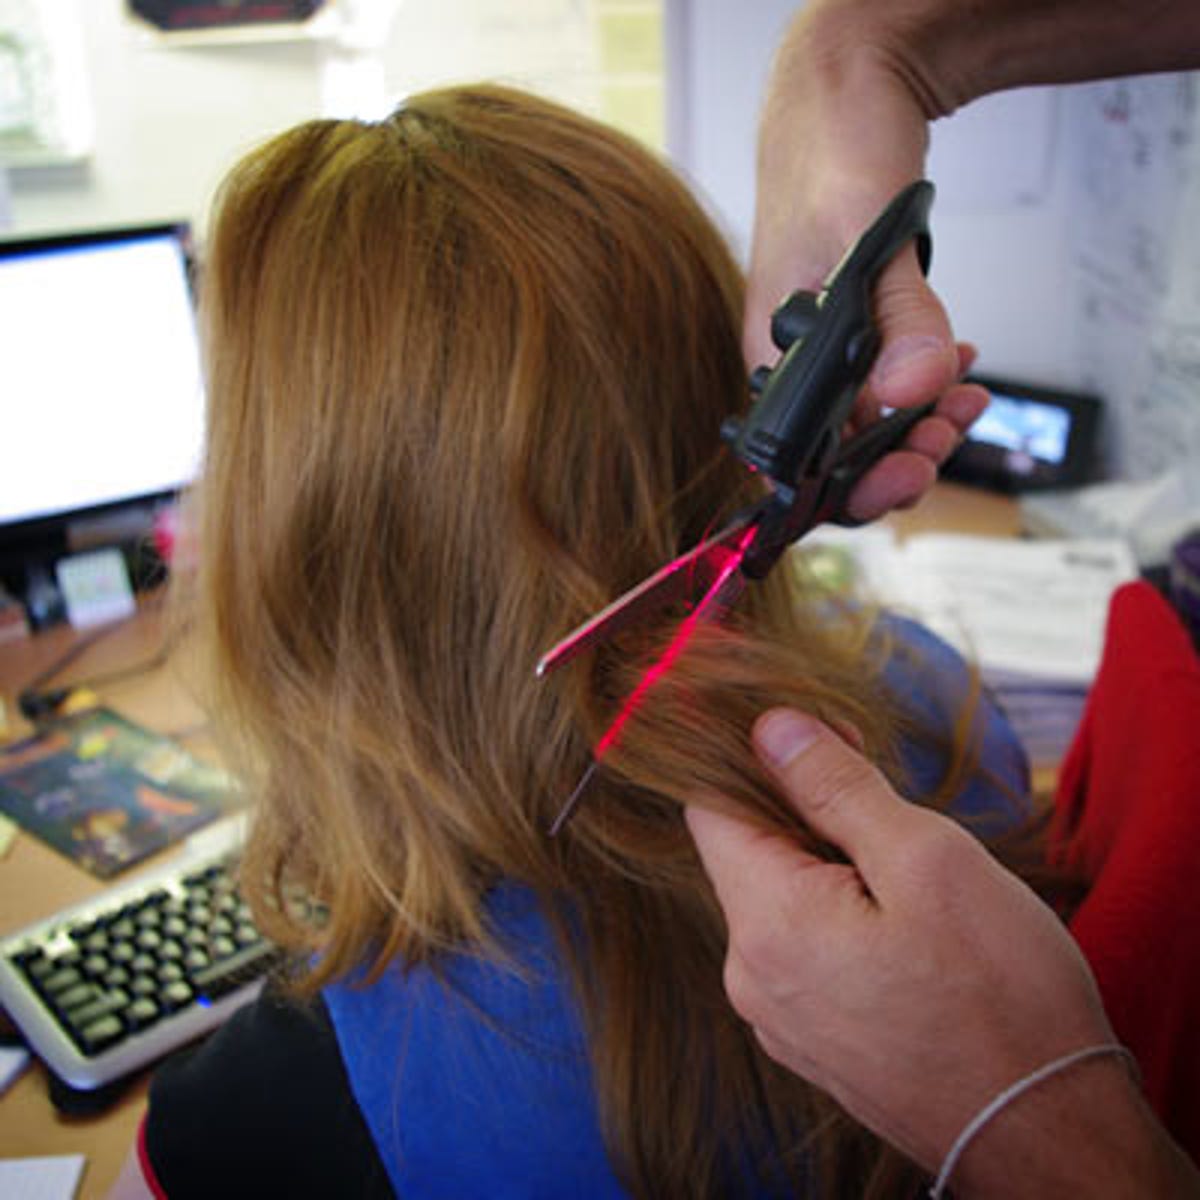 Move over, Flowbee, it's the laser haircut - CNET